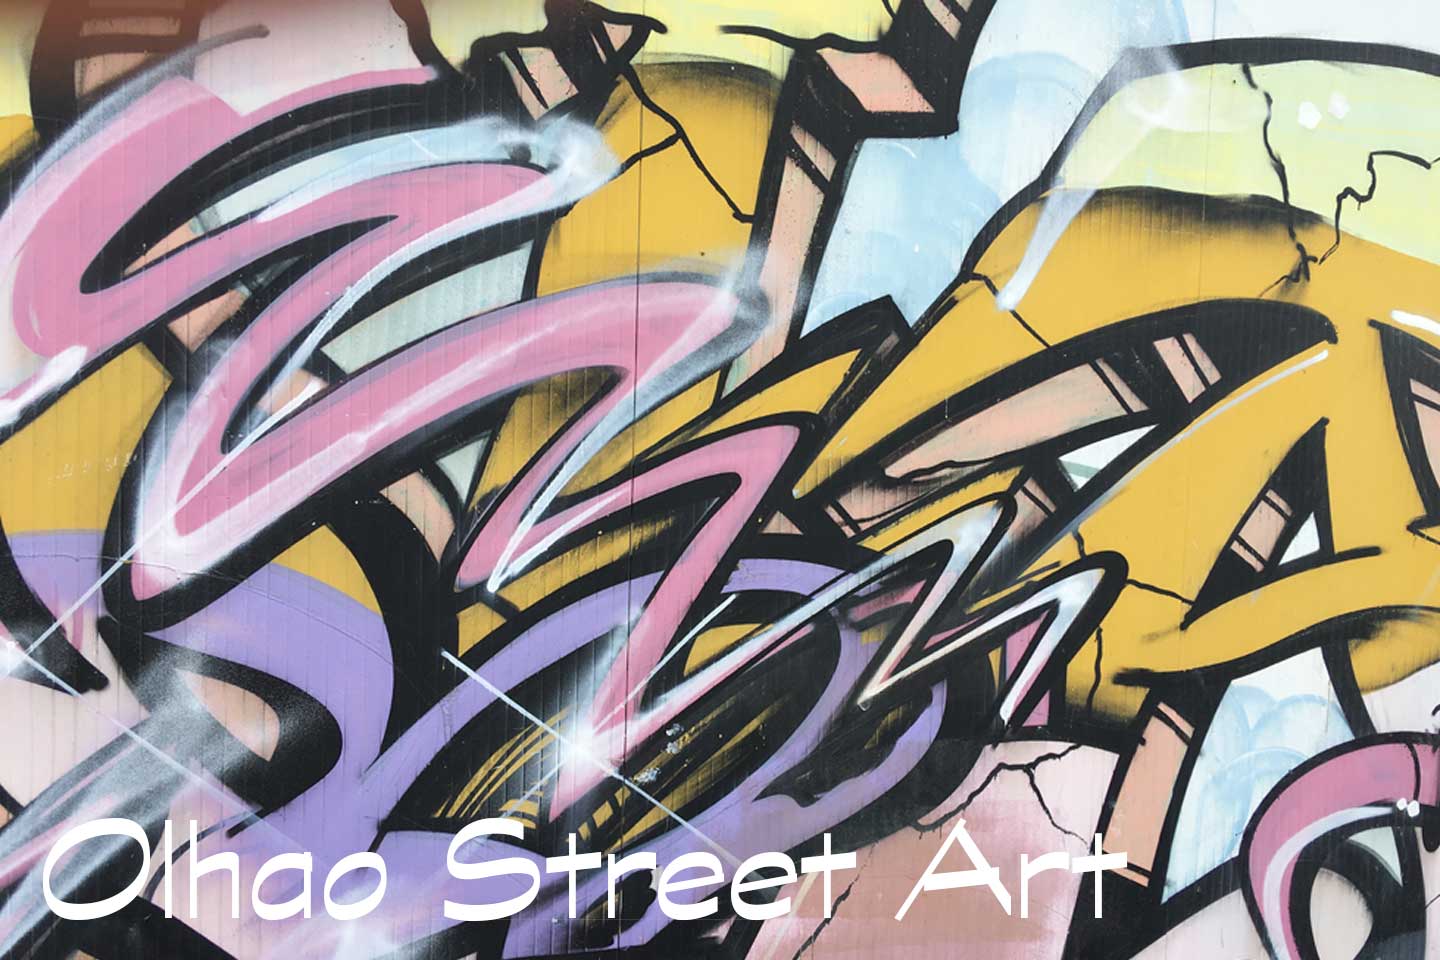 A Photo of Olhao Street Art - pink, purple, orange and black shapes